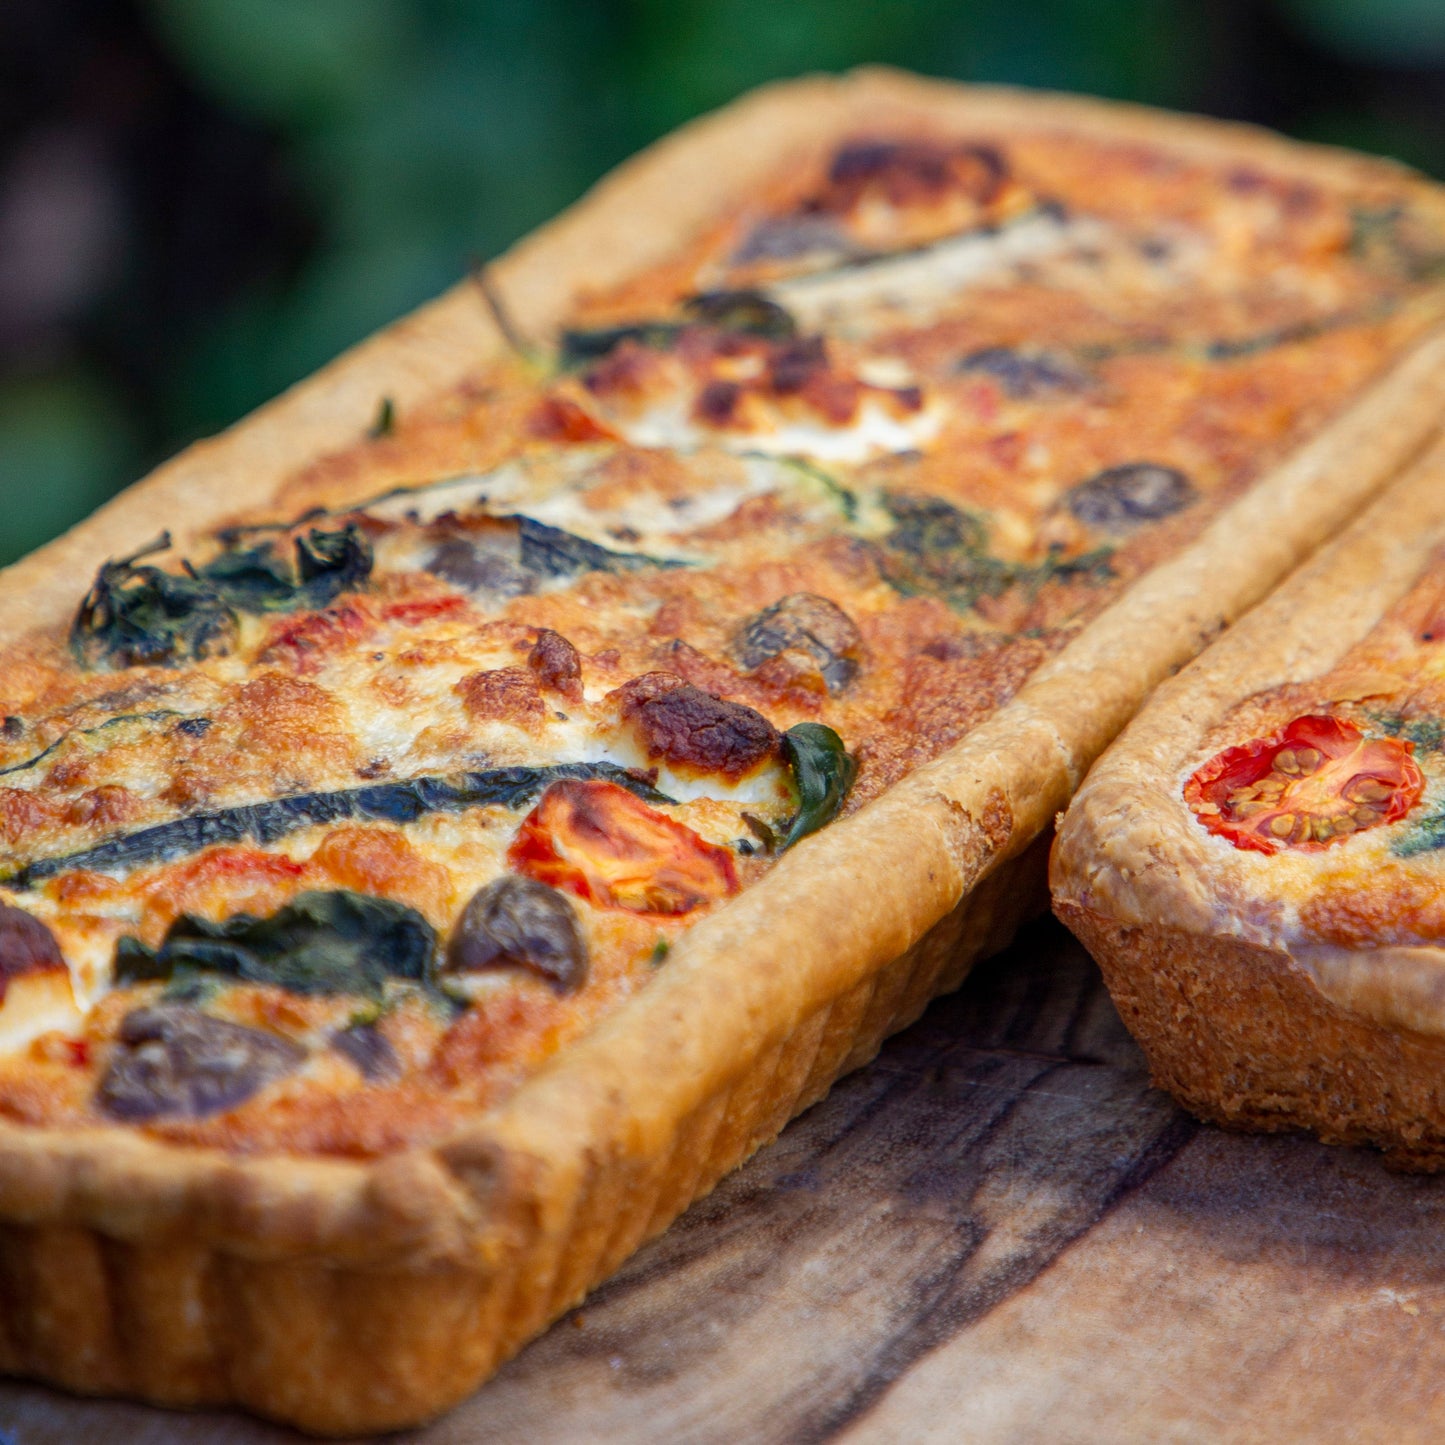 Long Mediterranean Vegetable, Olive and Goats Cheese Tart